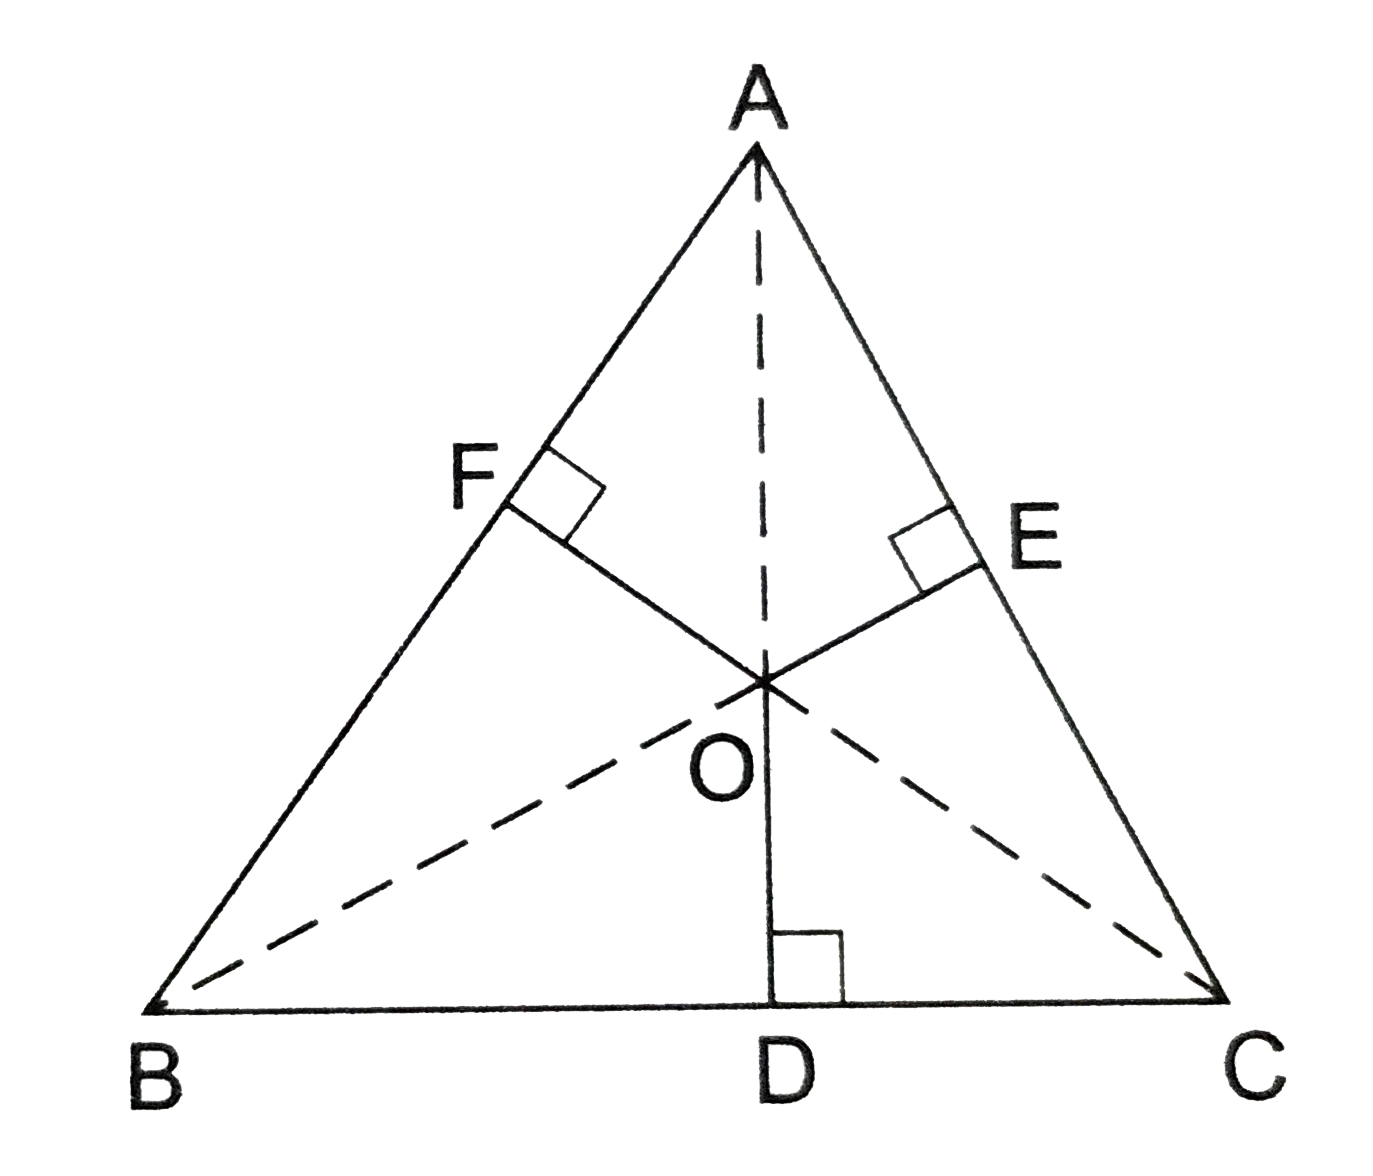 O is the a point in the interior of Delta ABC, OD bot BC, OE bot AC and AC and OF bot AB, as shown in the figure,      Prove that :   (i) OA^(2)+OB^(2)+OC^(2)-OD^(2)-OD^(2)-OF^(2)=AF^(2)+BD^(2)+CE^(2)   (ii) AF^(2)+BD^(2)+CE^(2)=AD^(2)+BF^(2)+CD^(2)